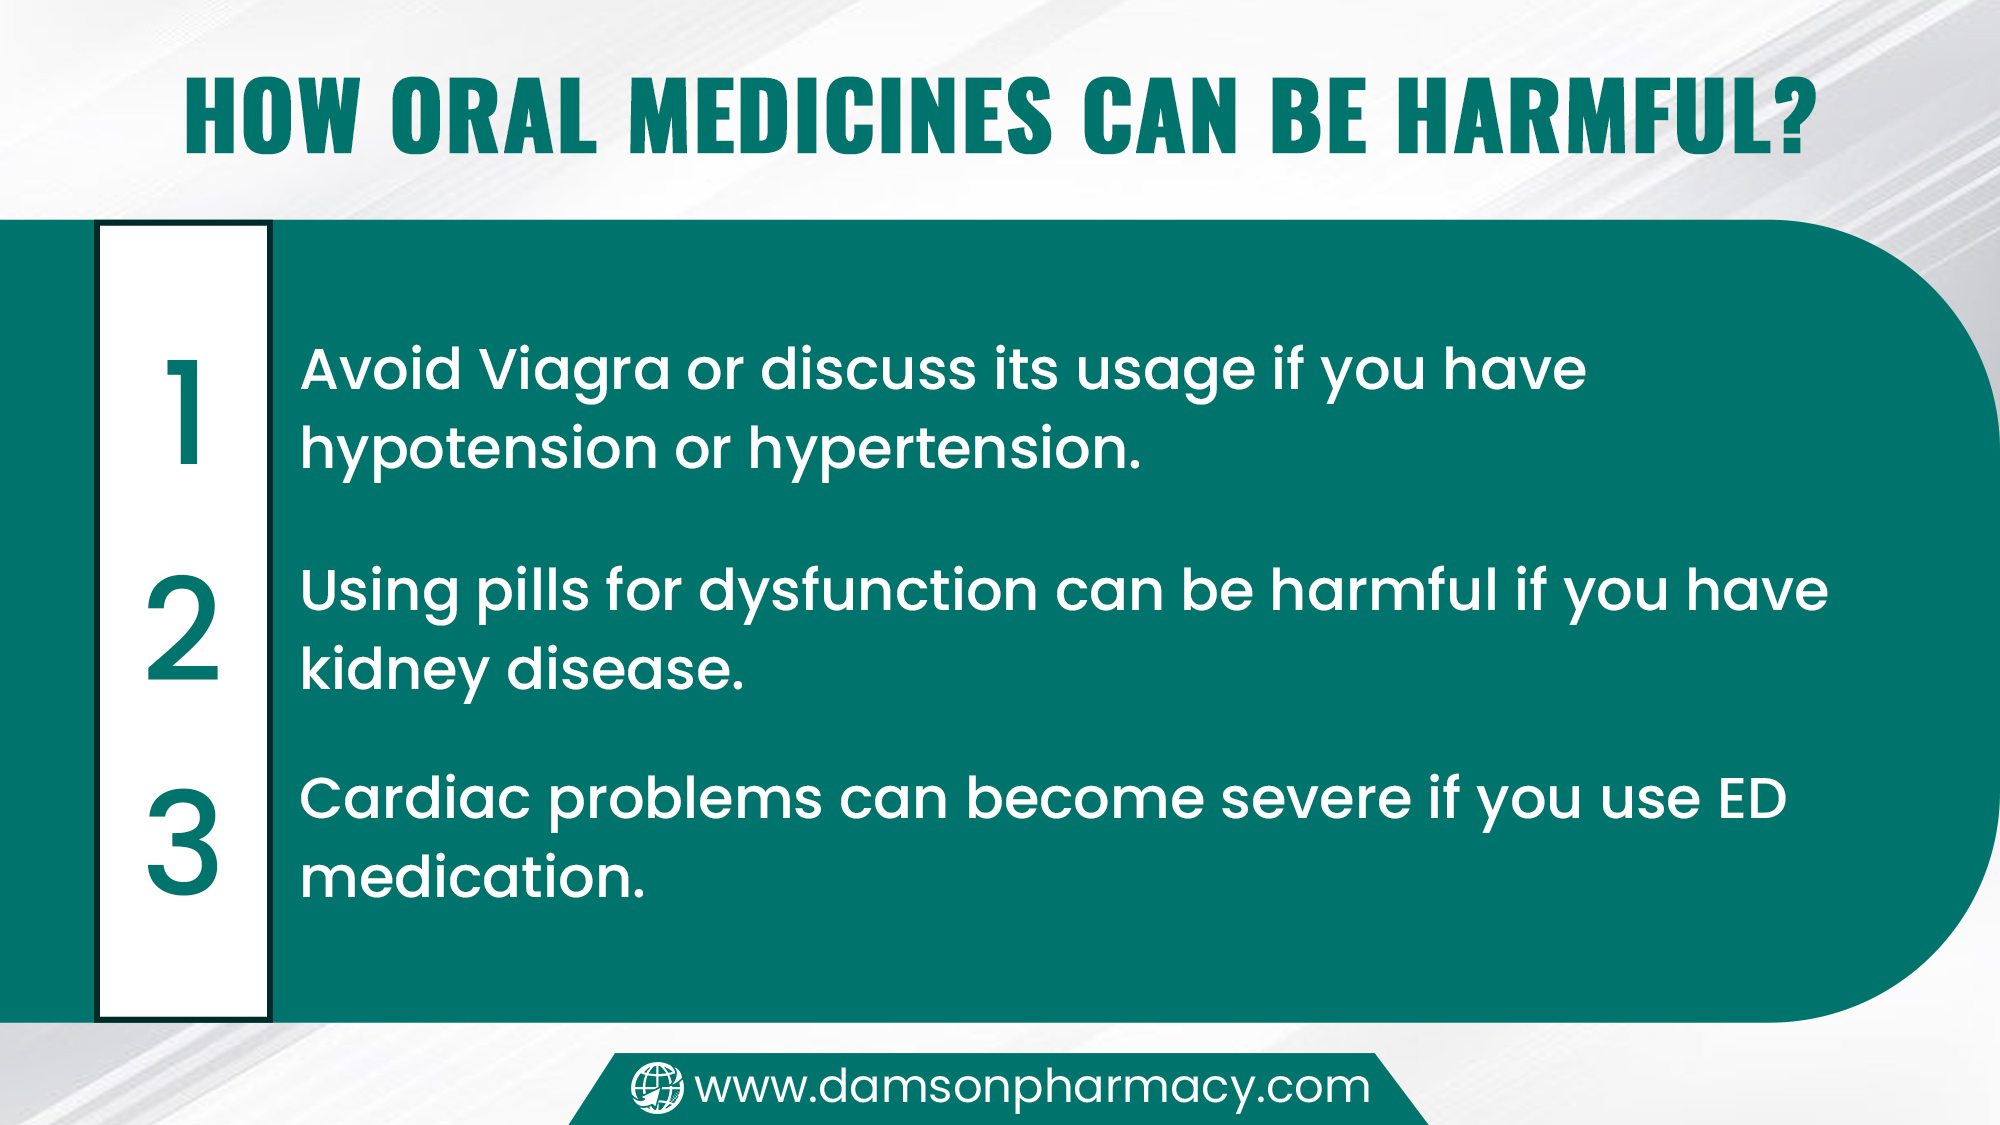 How Oral Medicines Can Be Harmful